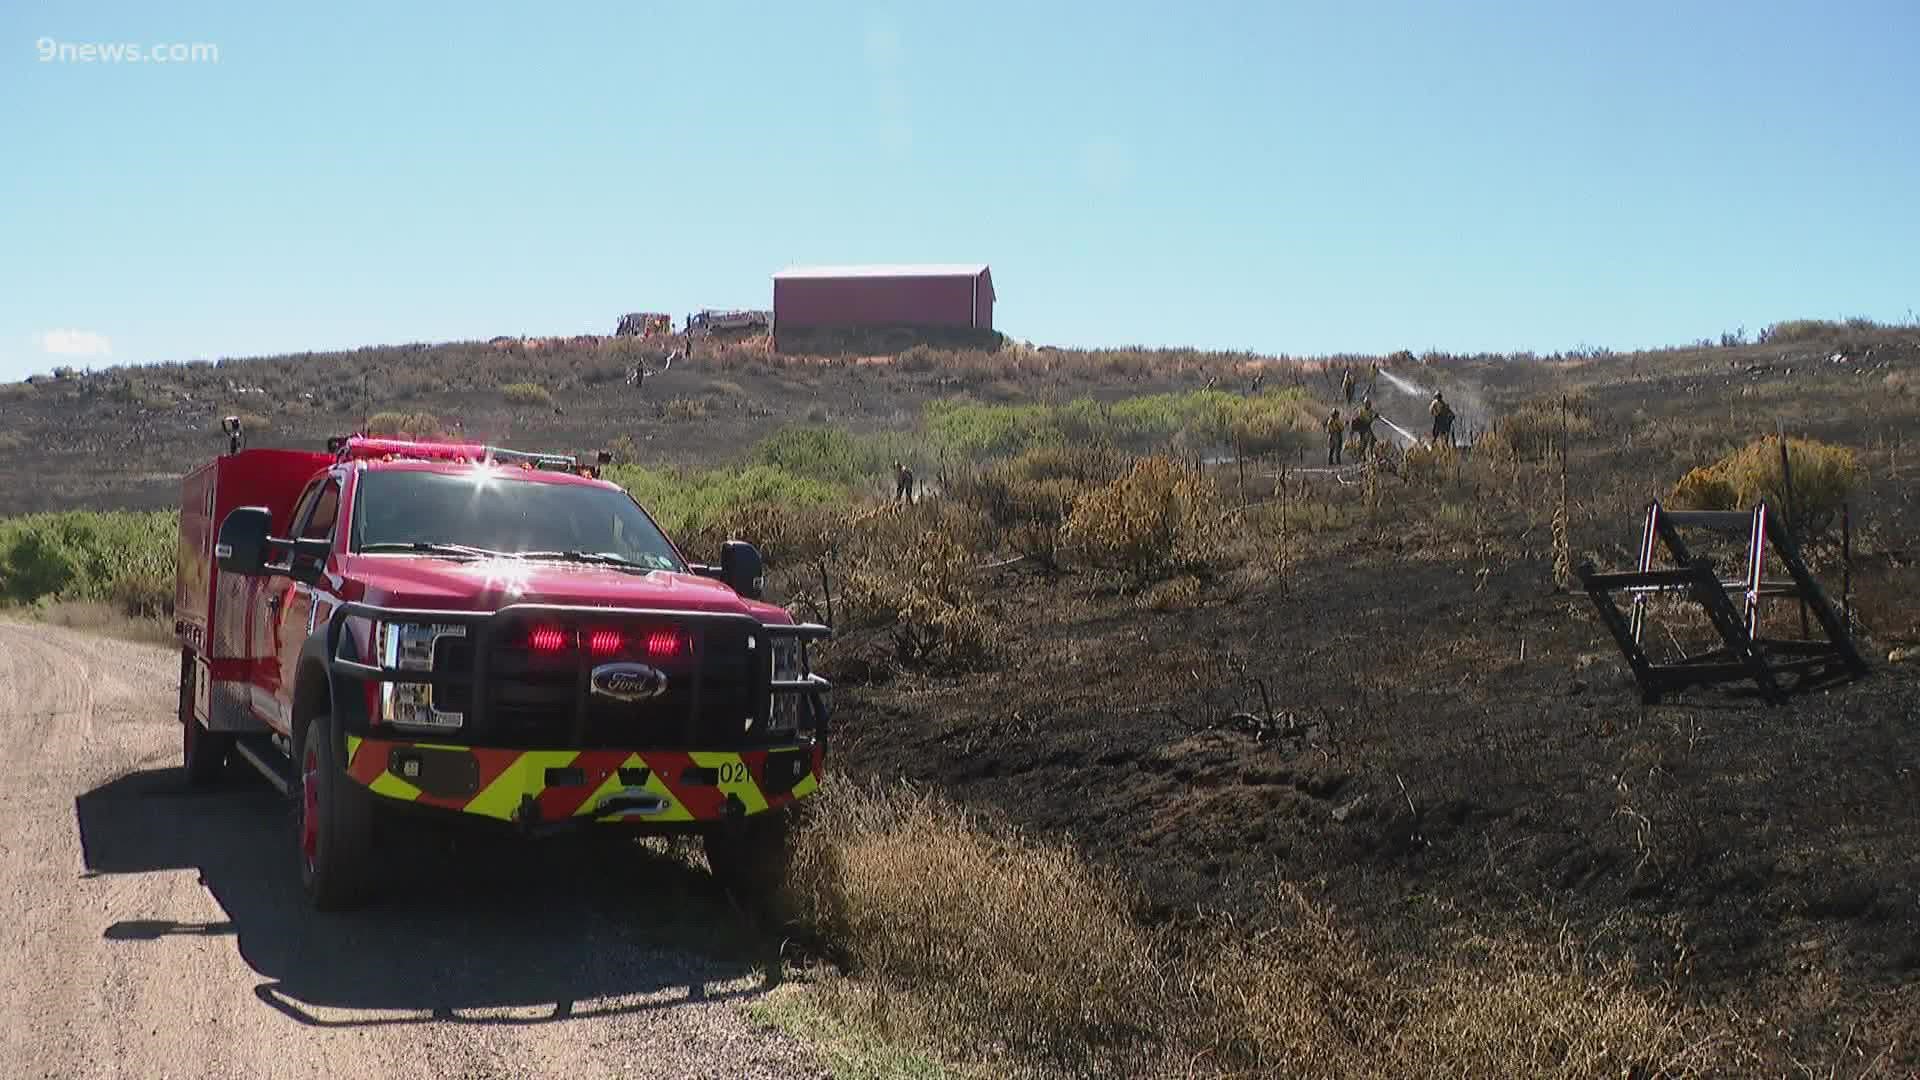 The fire was first reported Monday morning, leading to a voluntary evacuation notice in the areas around Masonville and southern Horsetooth Reservoir.